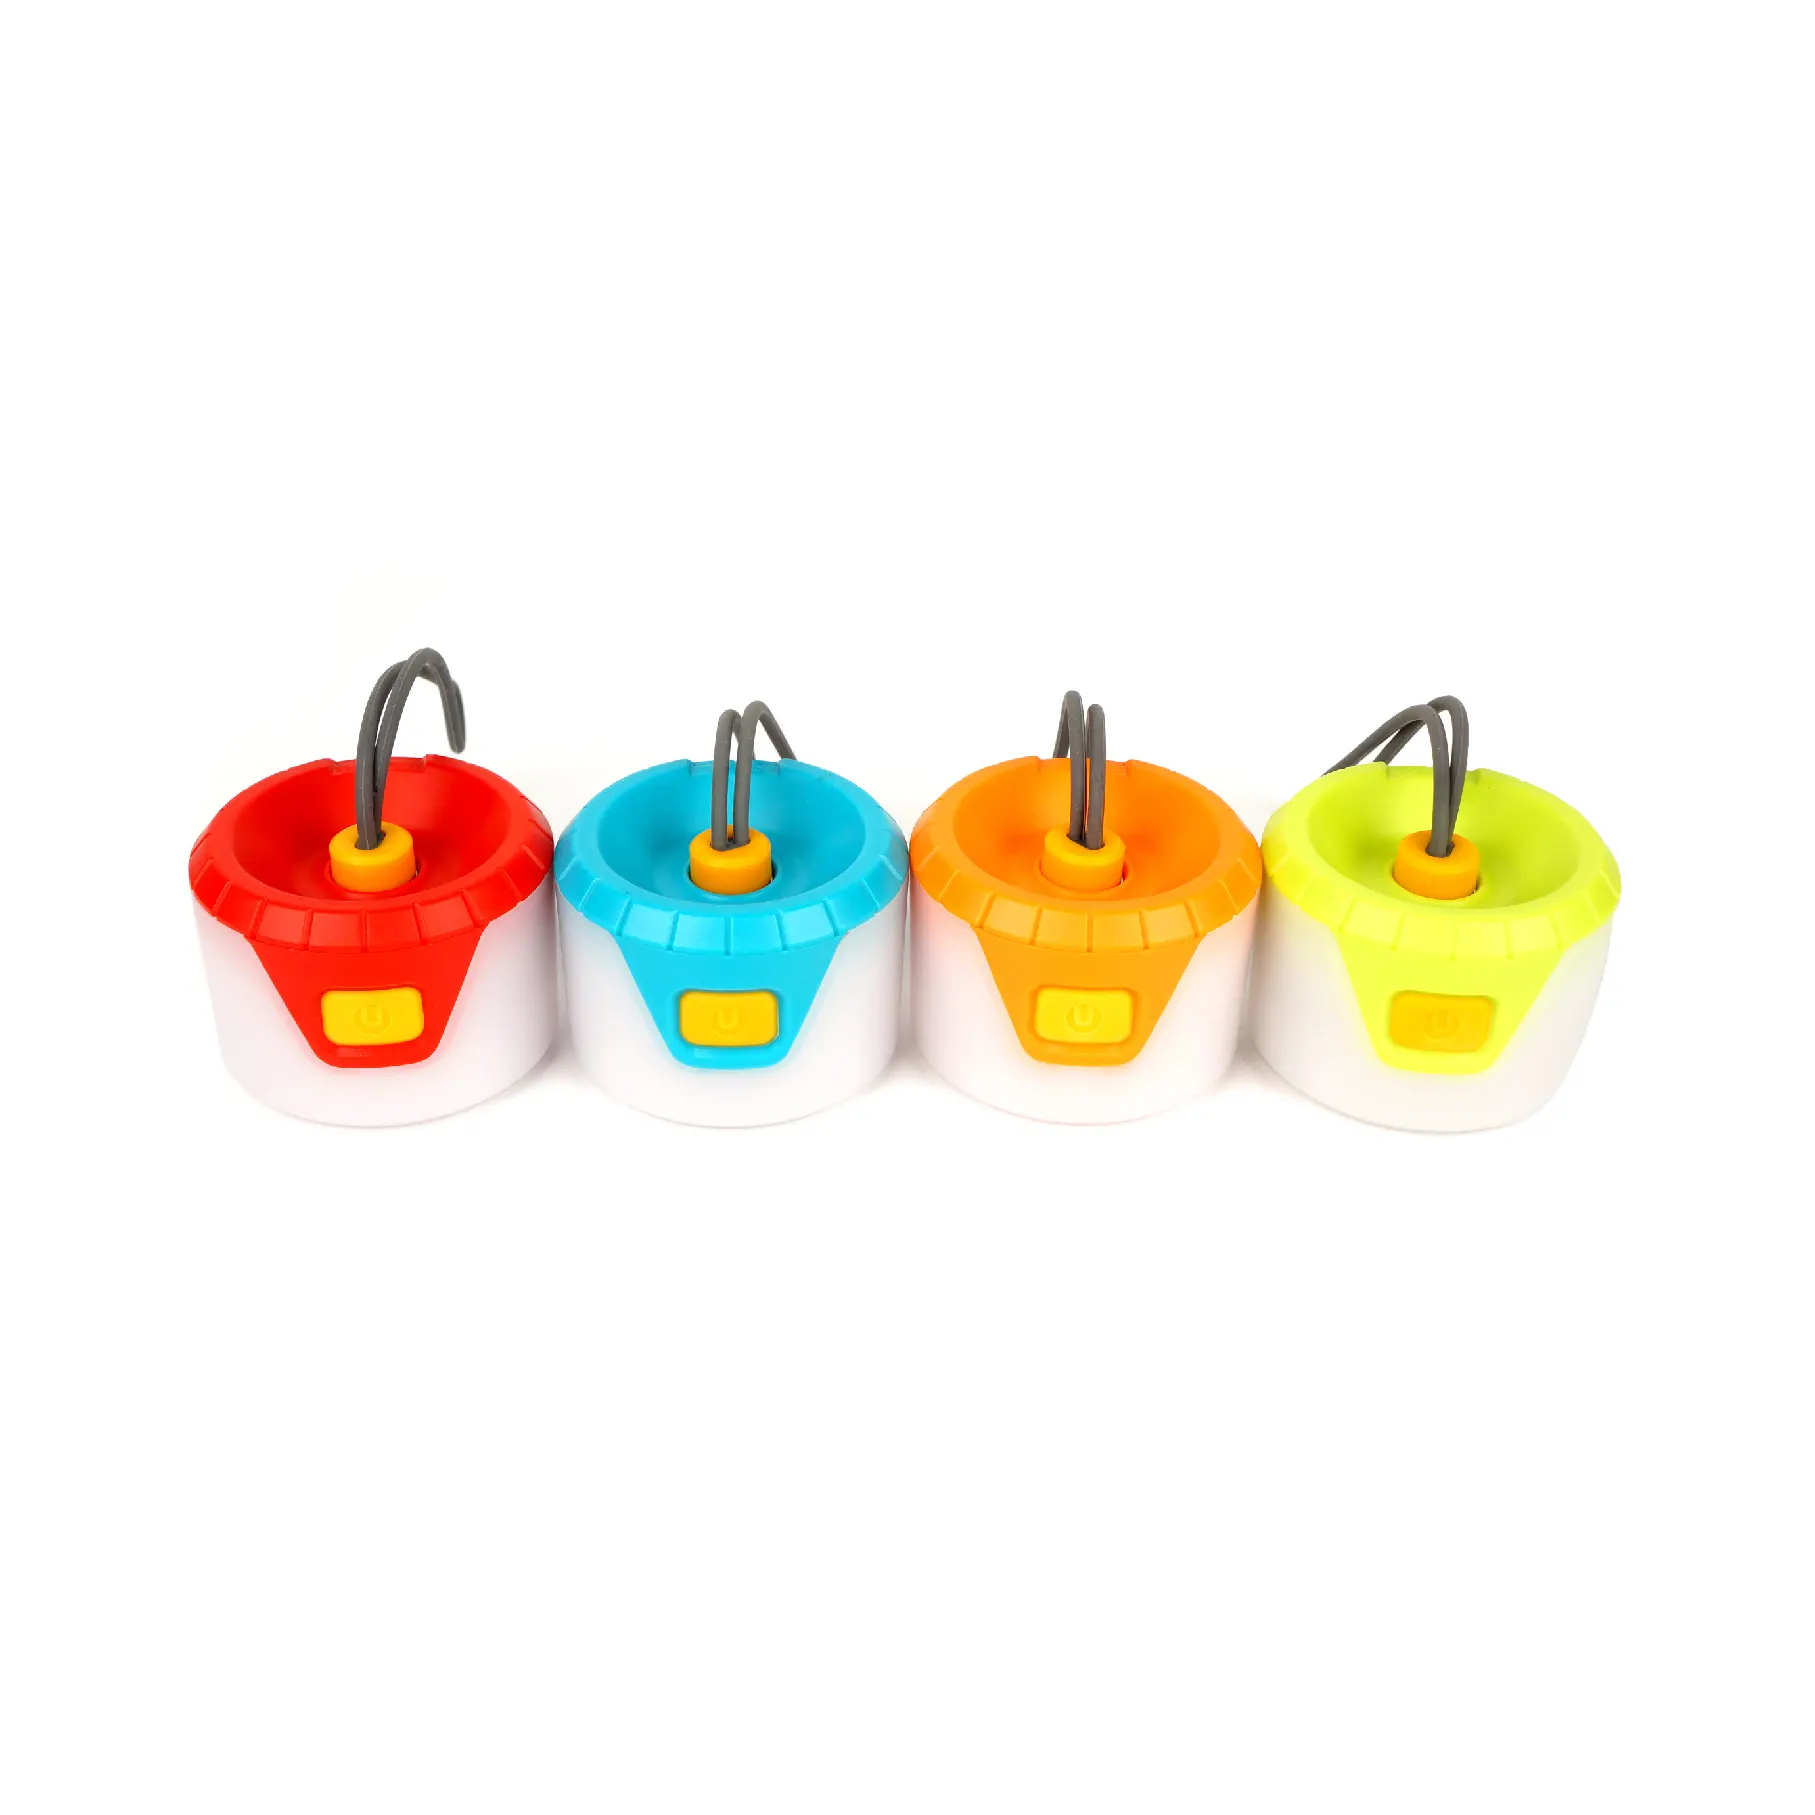 Hot Portable LED Tent Mini Emergency Lantern Camping Lights Camp Lantern Outdoor With Magnet